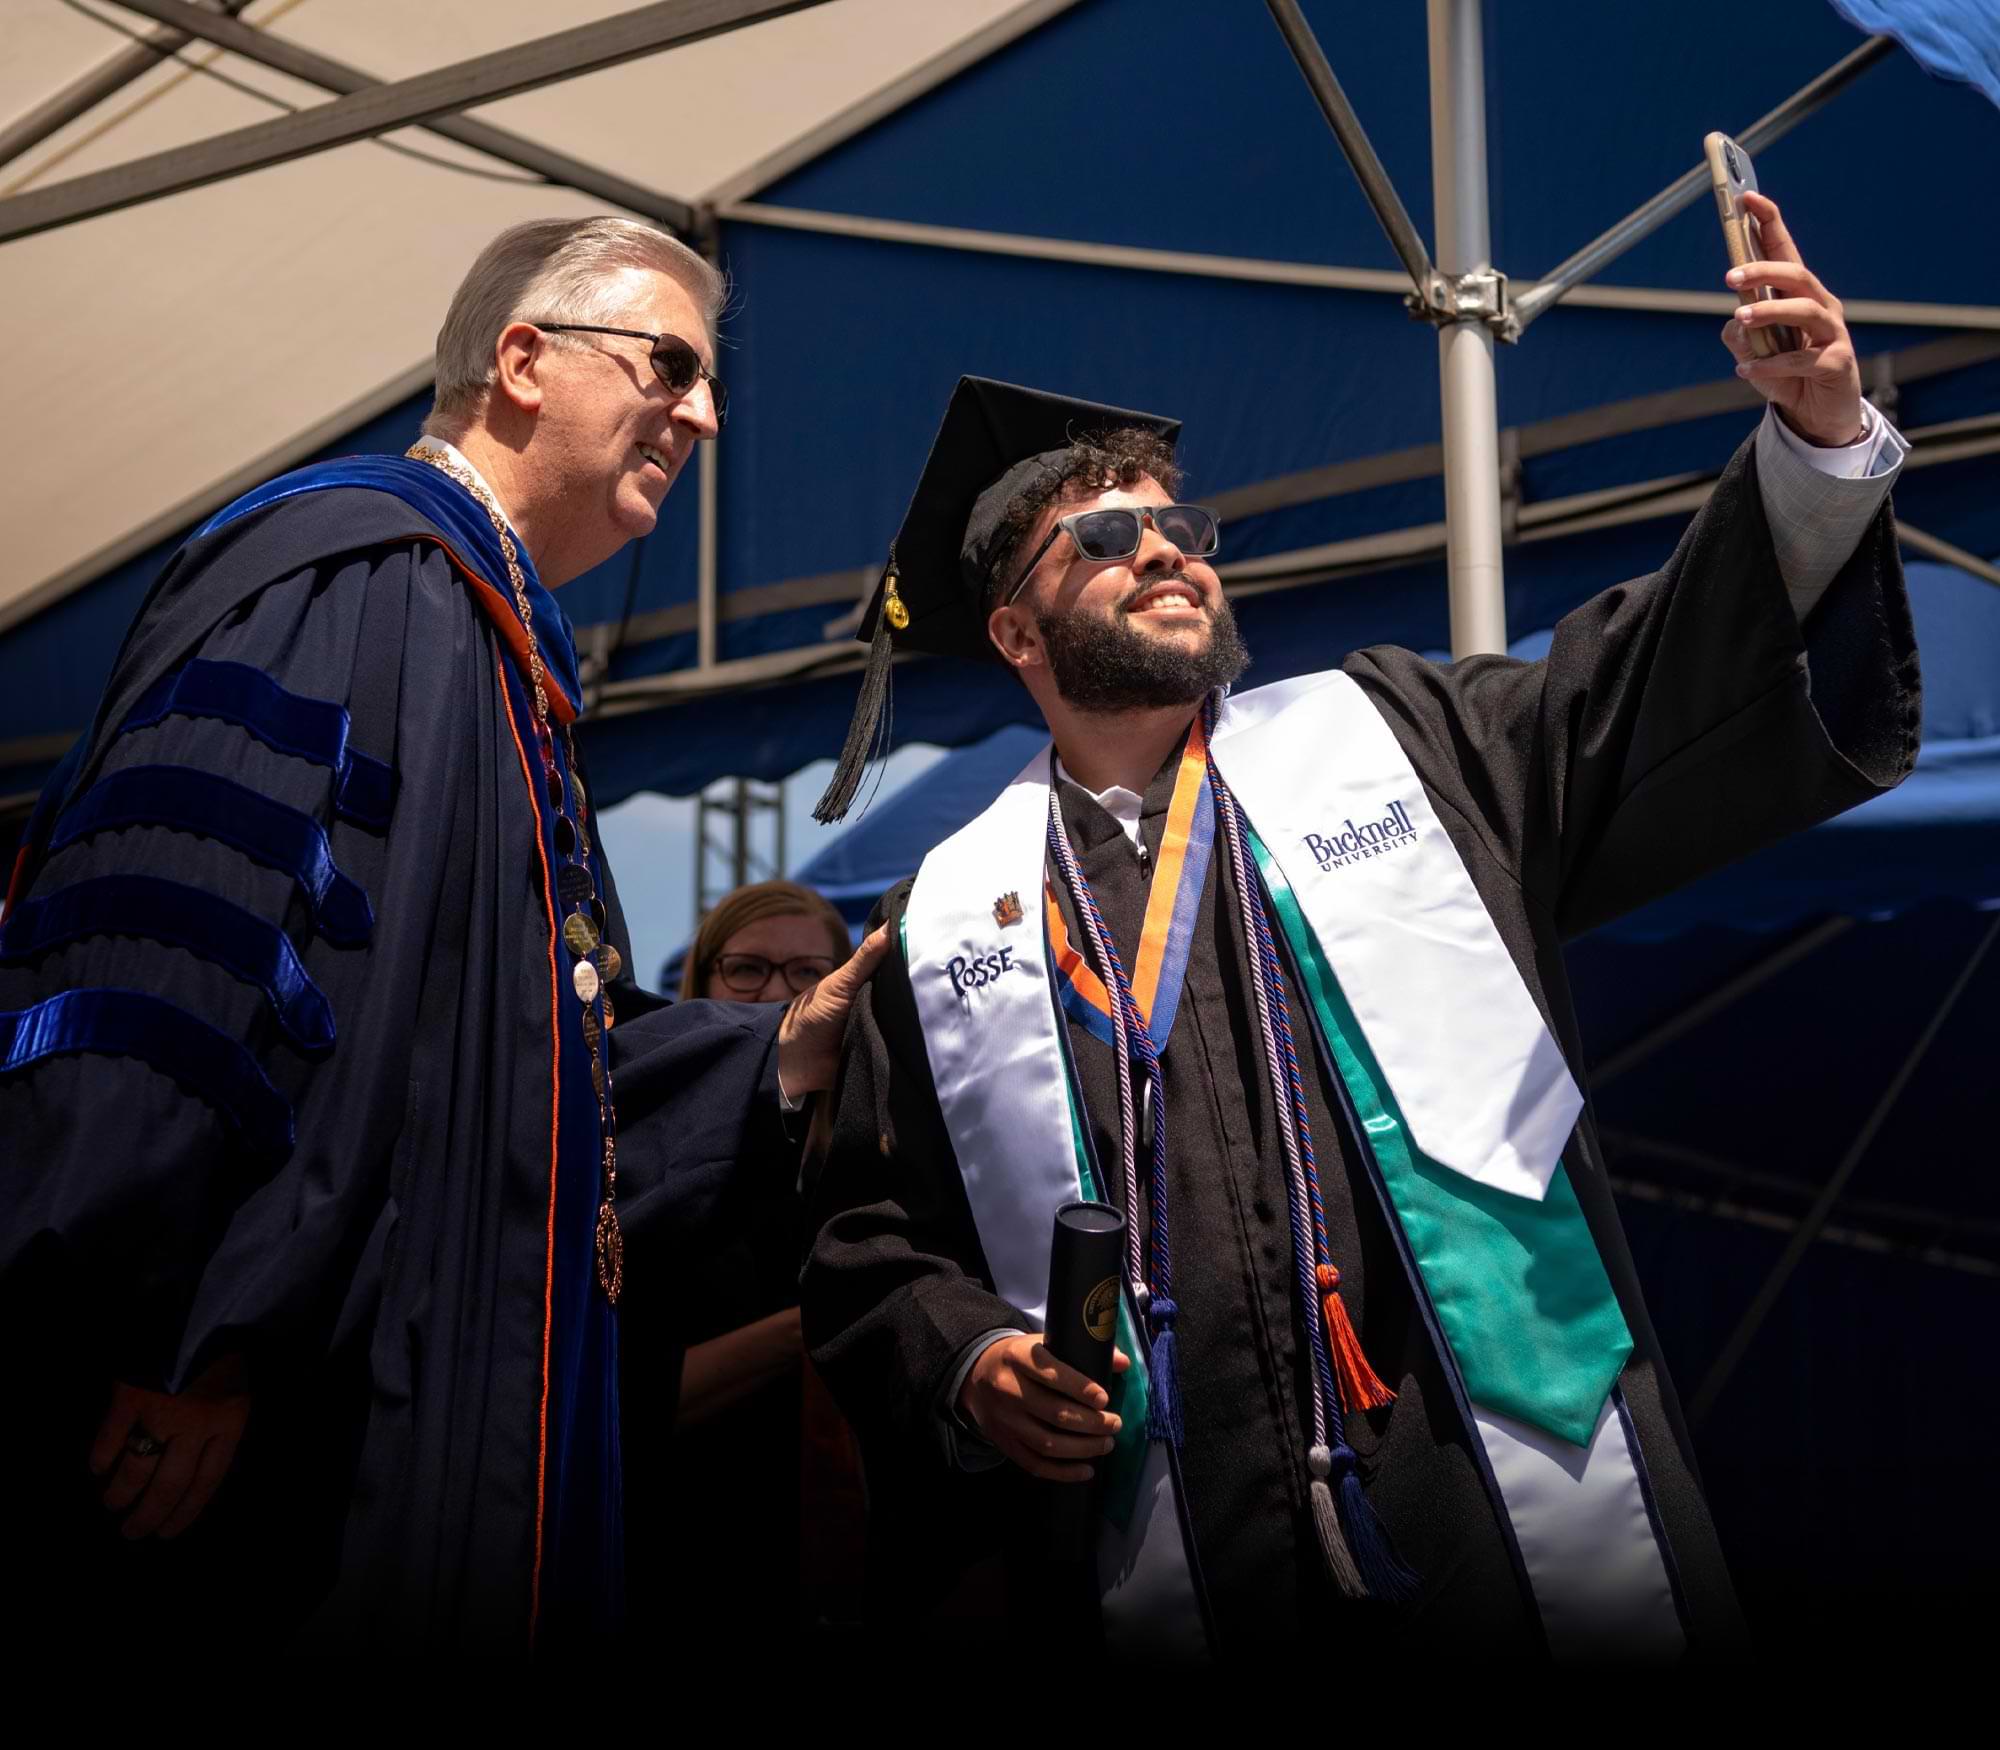 a Bucknell grad dressed in robes and multiple cords and stoles takes a selfie on the ceremony stage with Bucknell President John C. Bravman